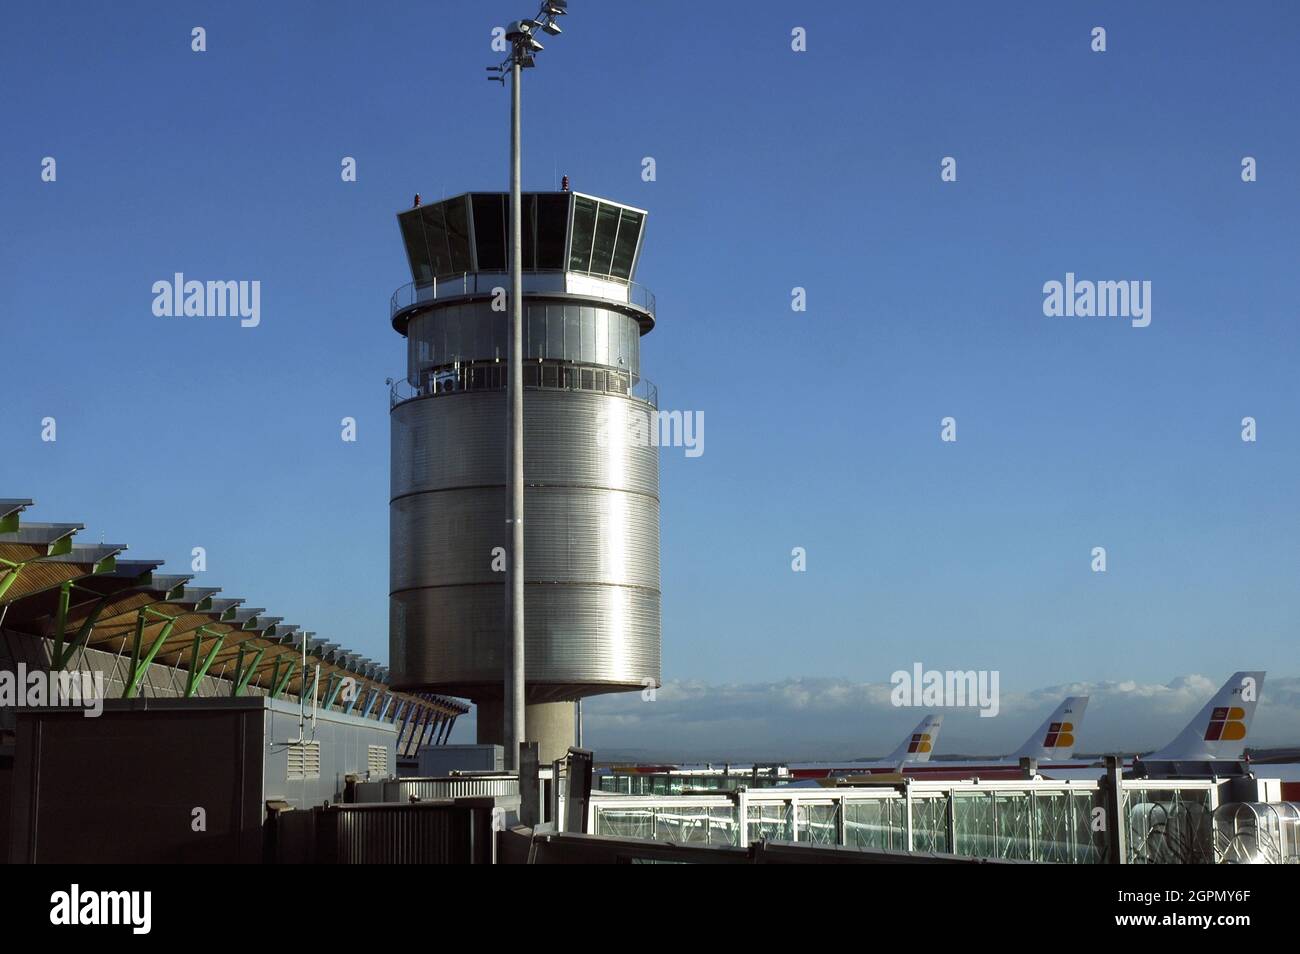 The Ground control tower at terminal T4S of Adolfo Suarez Madrid–Barajas Airport the main international airport serving Madrid in Spain Stock Photo